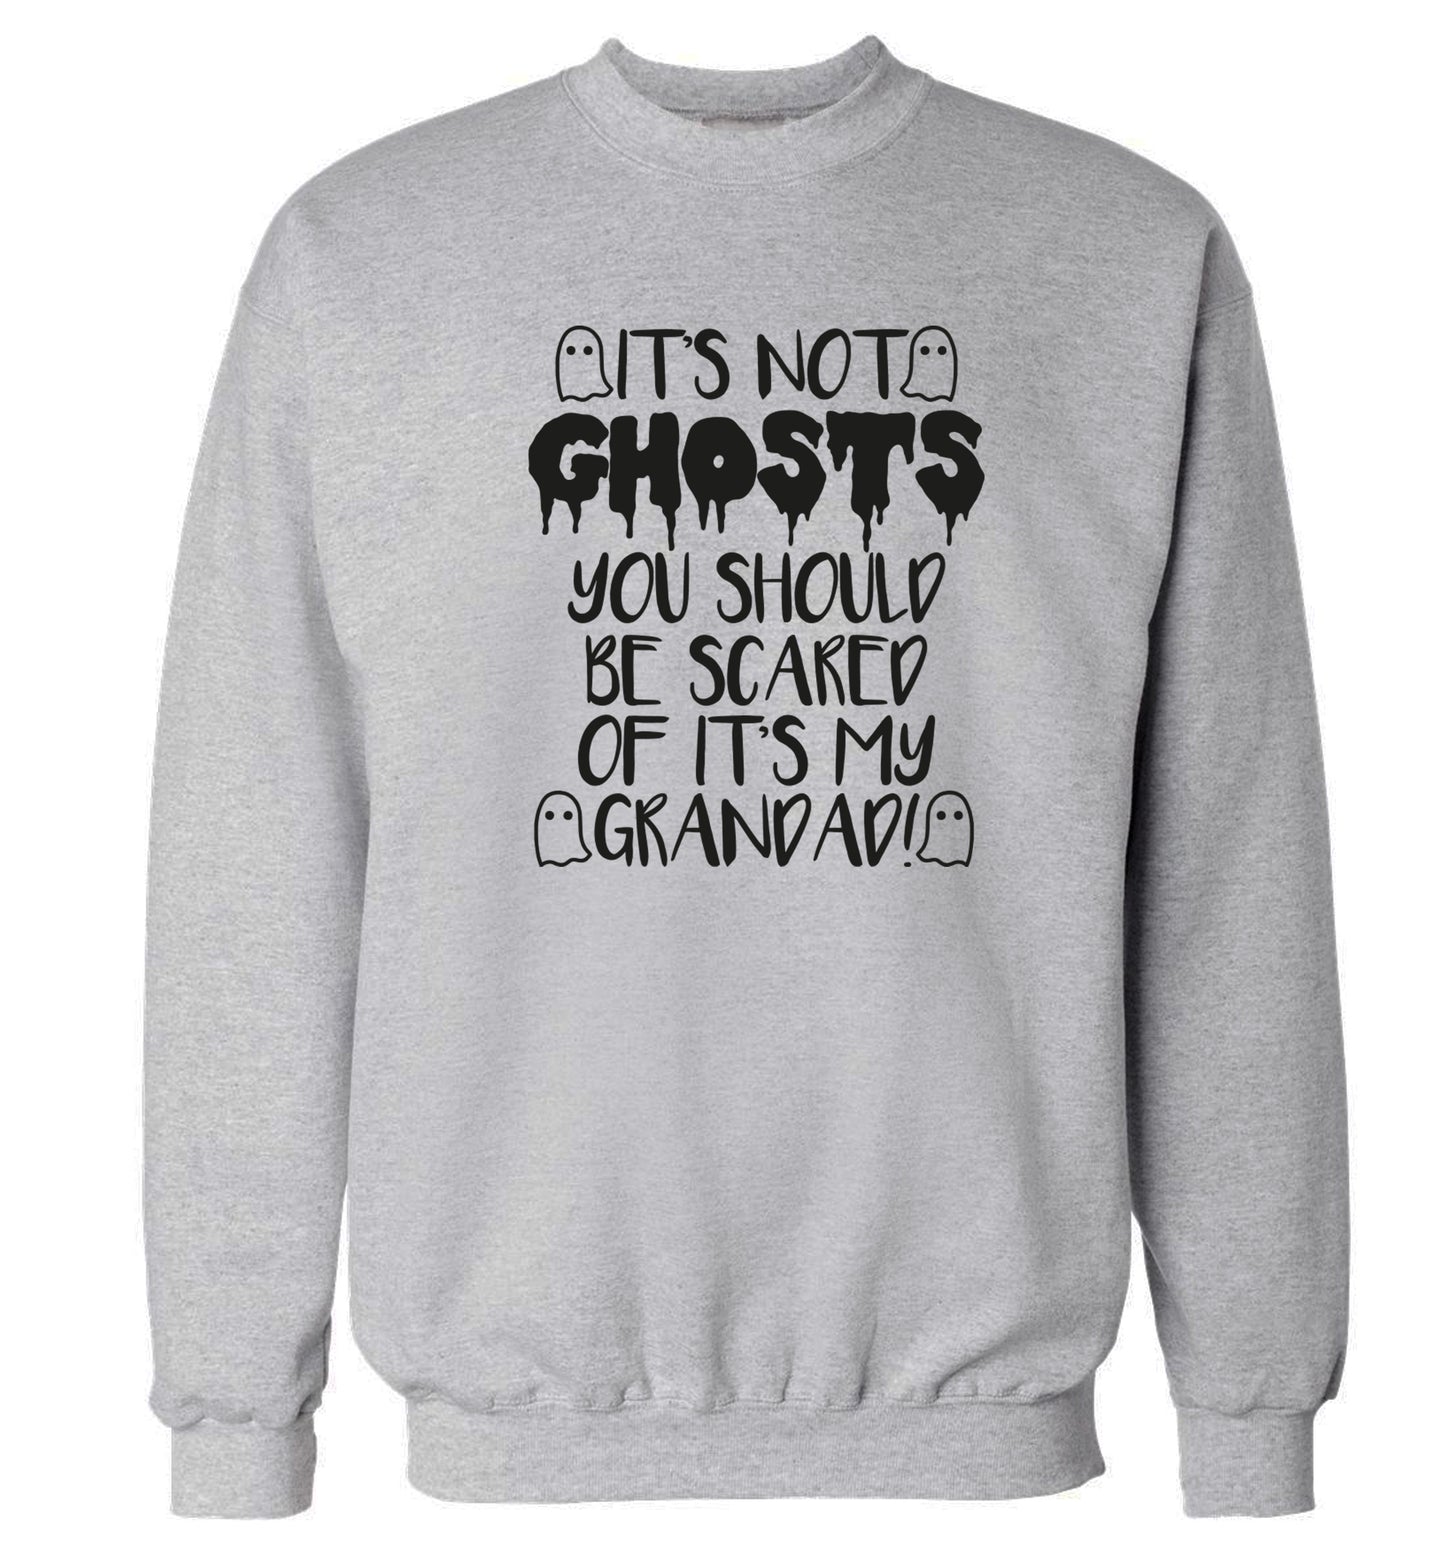 It's not ghosts you should be scared of it's my grandad! Adult's unisex grey Sweater 2XL